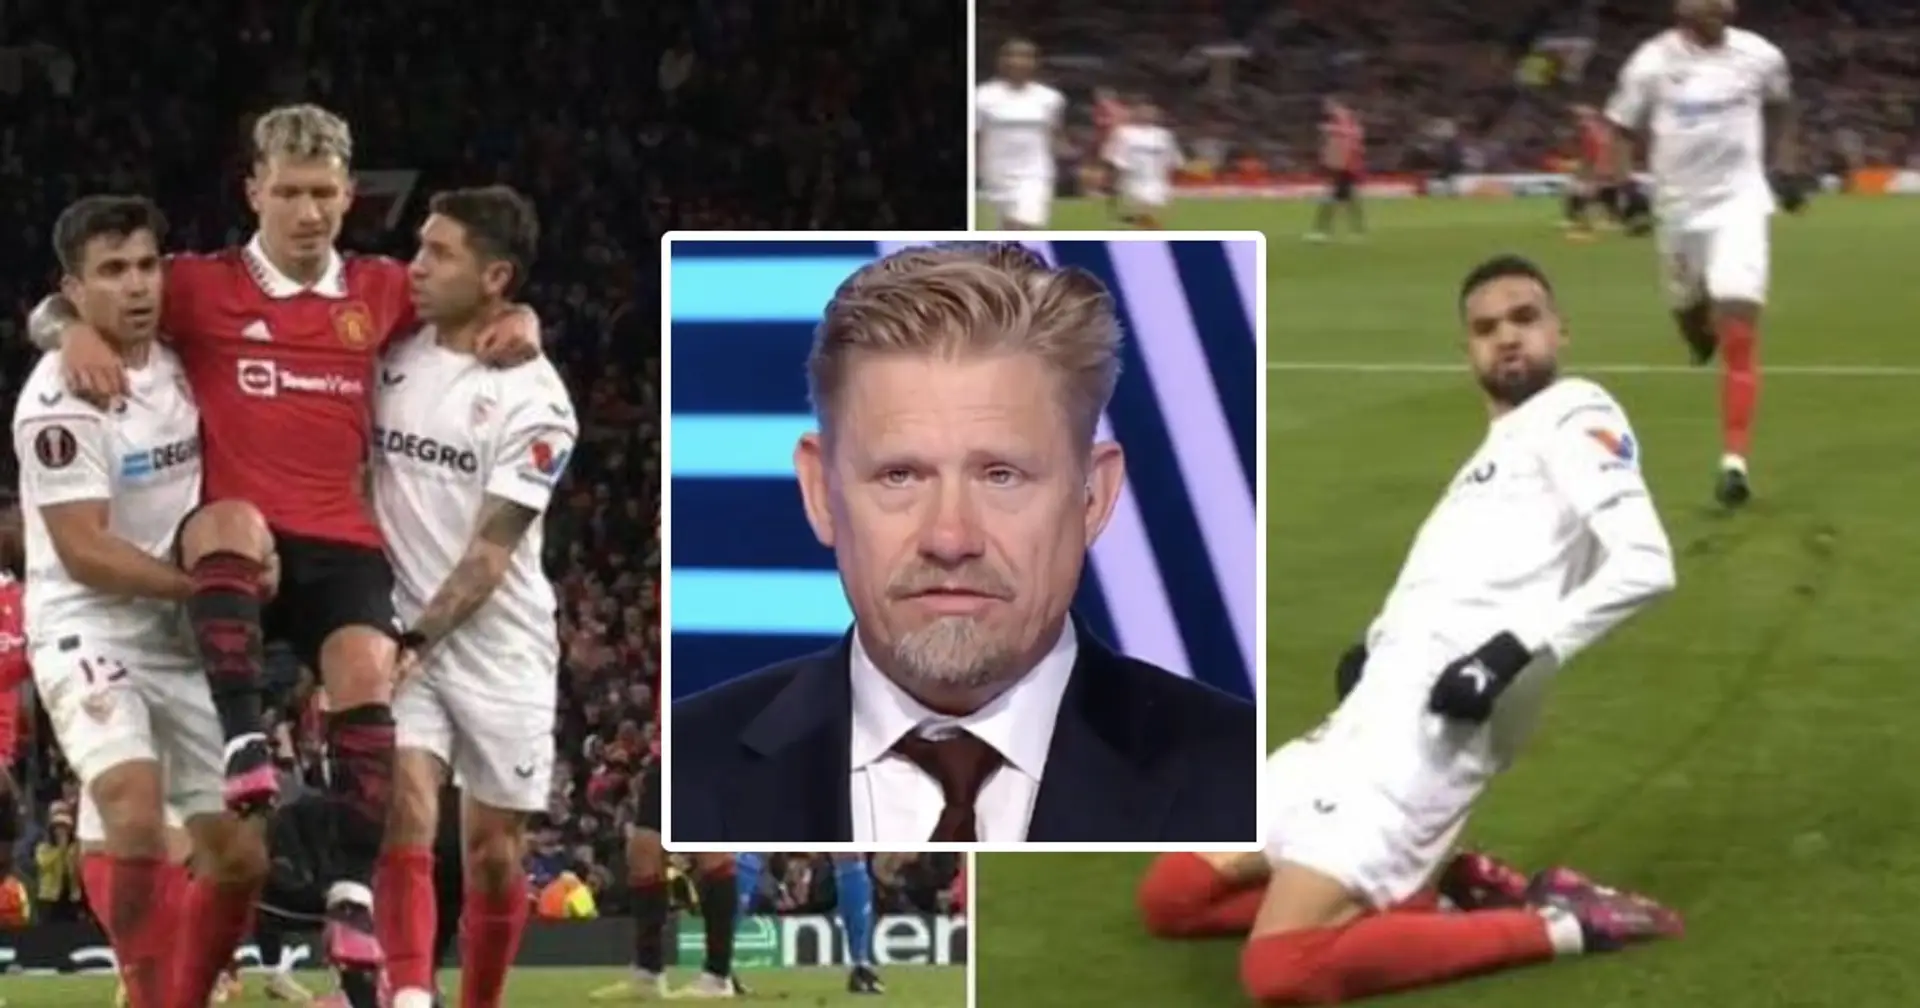 'He should've managed the situation': Schmeichel slams Man United player over role in Martinez's injury